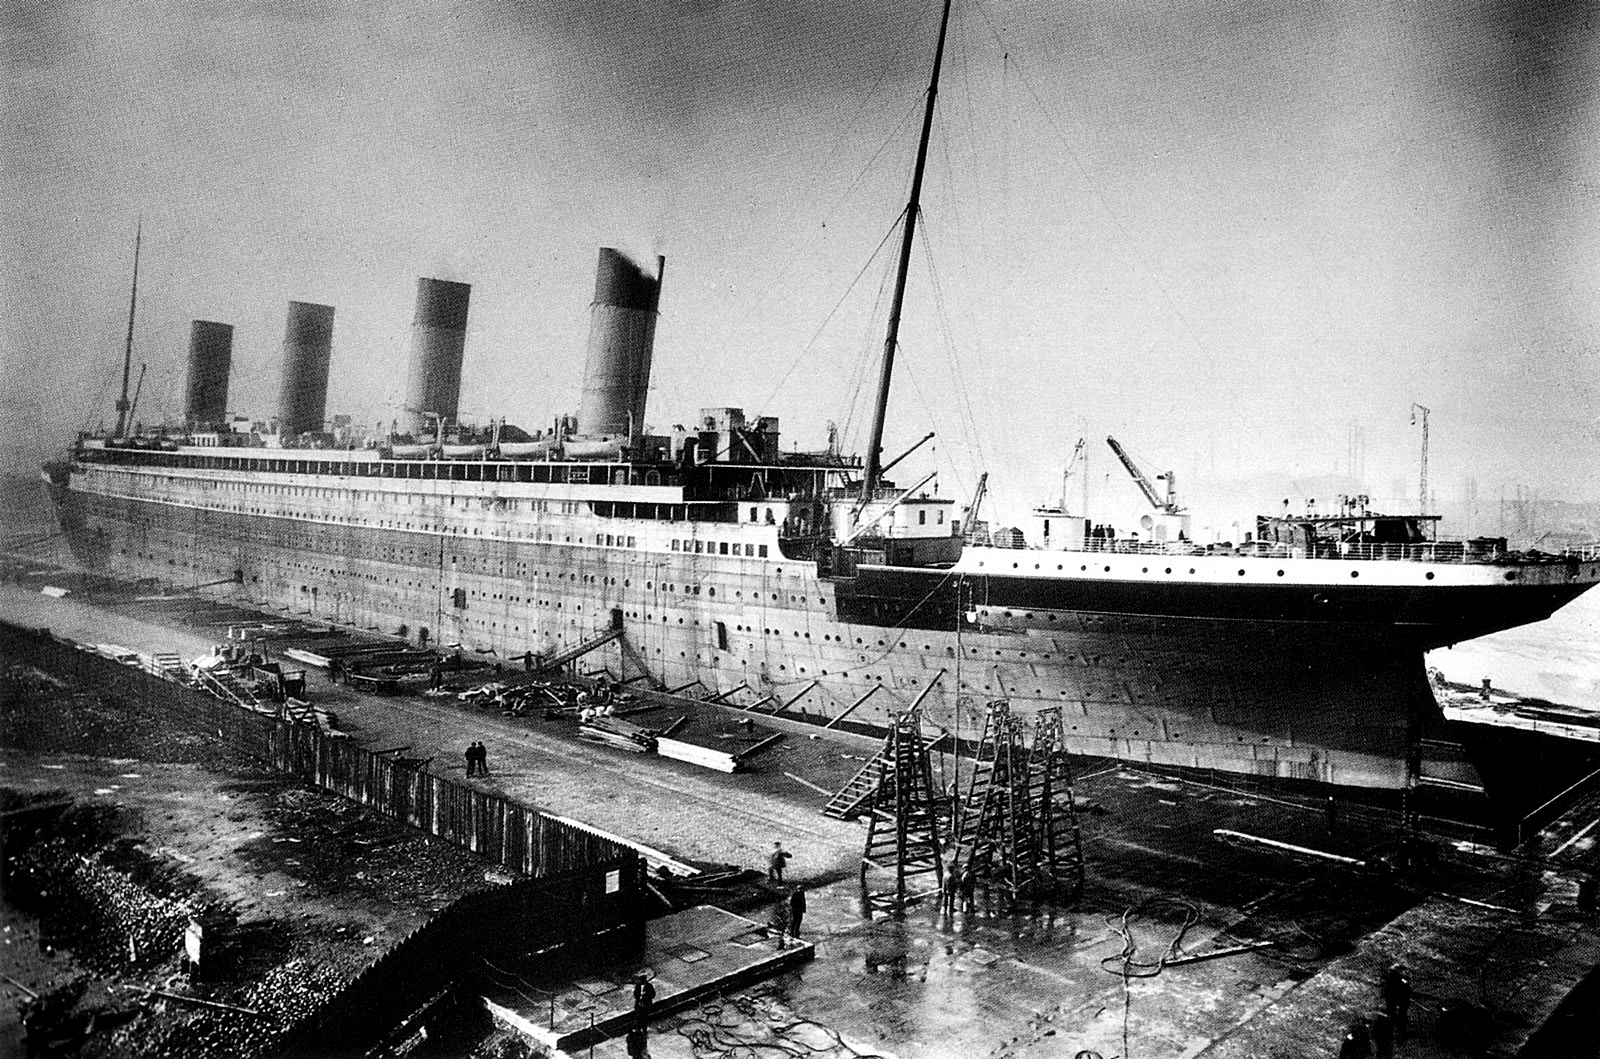 Titanic under construction in the fitting-out basin at Harland & Wolff, Belfast, 1911-1912